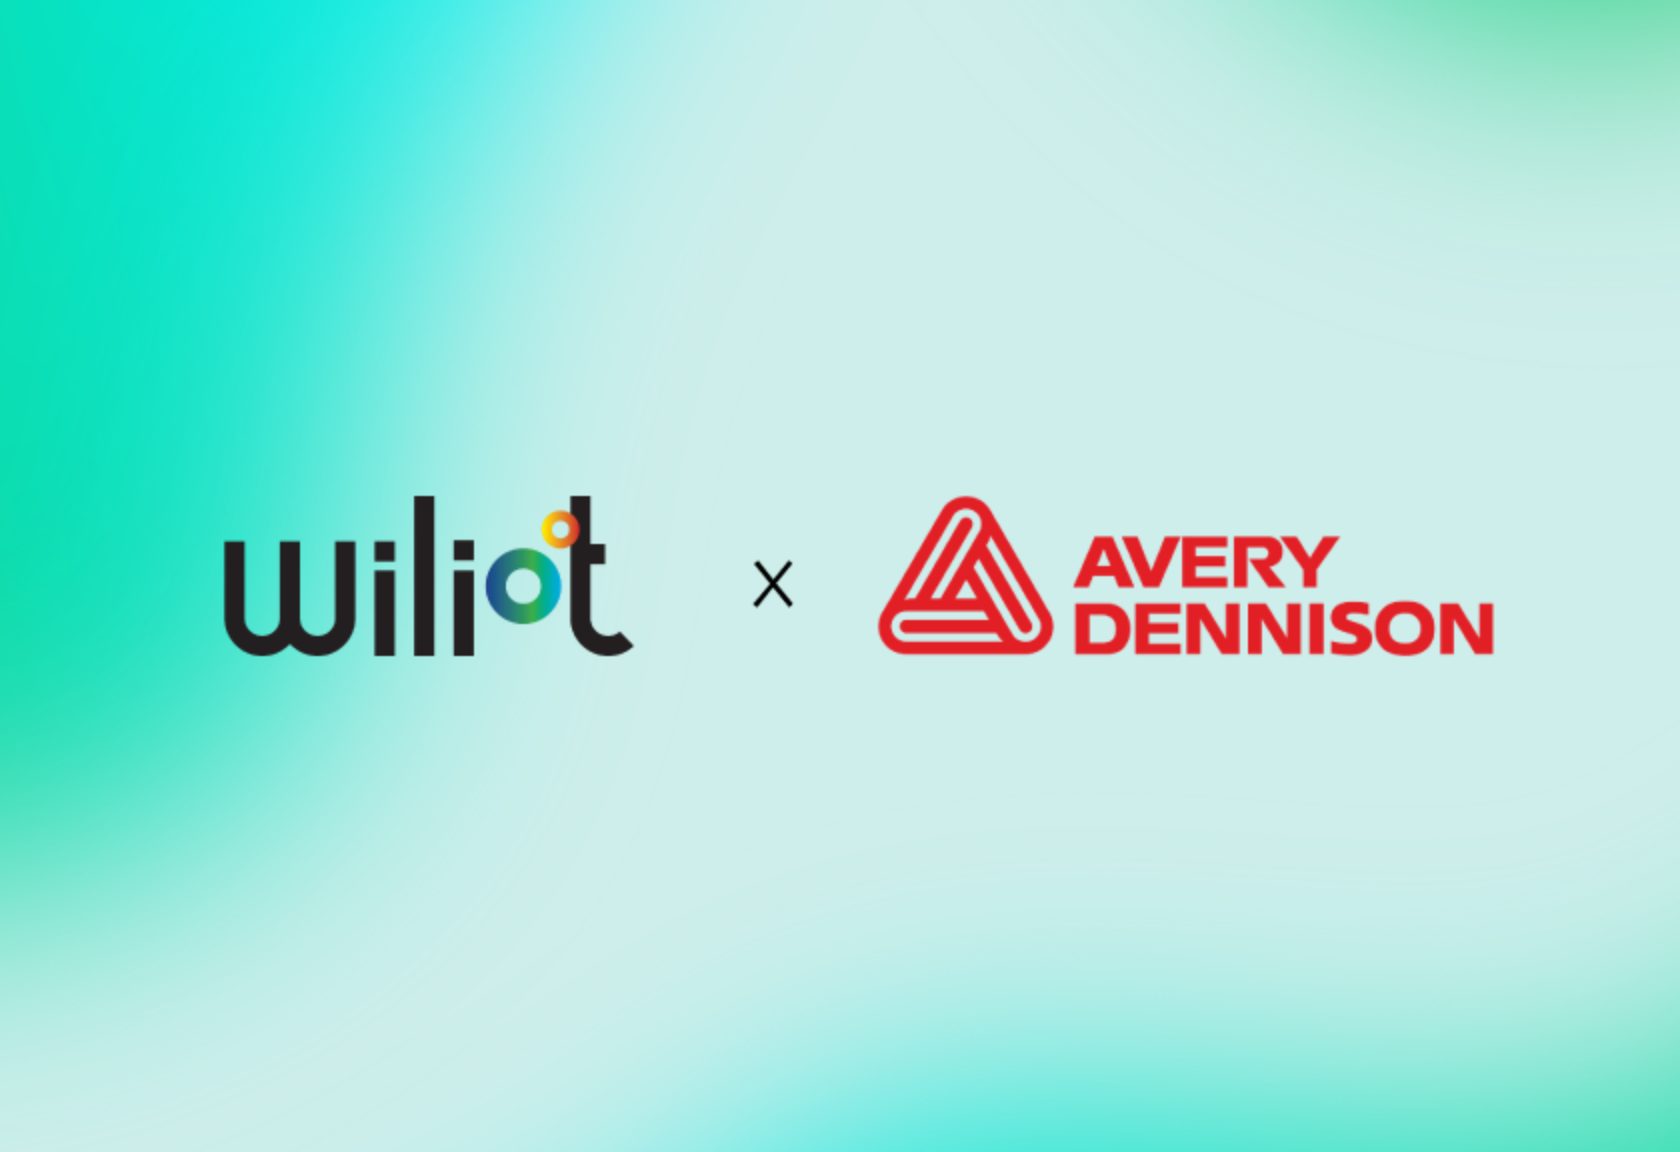 Avery Dennison and Wiliot announce strategic partnership to build and scale the future of the Internet of Things